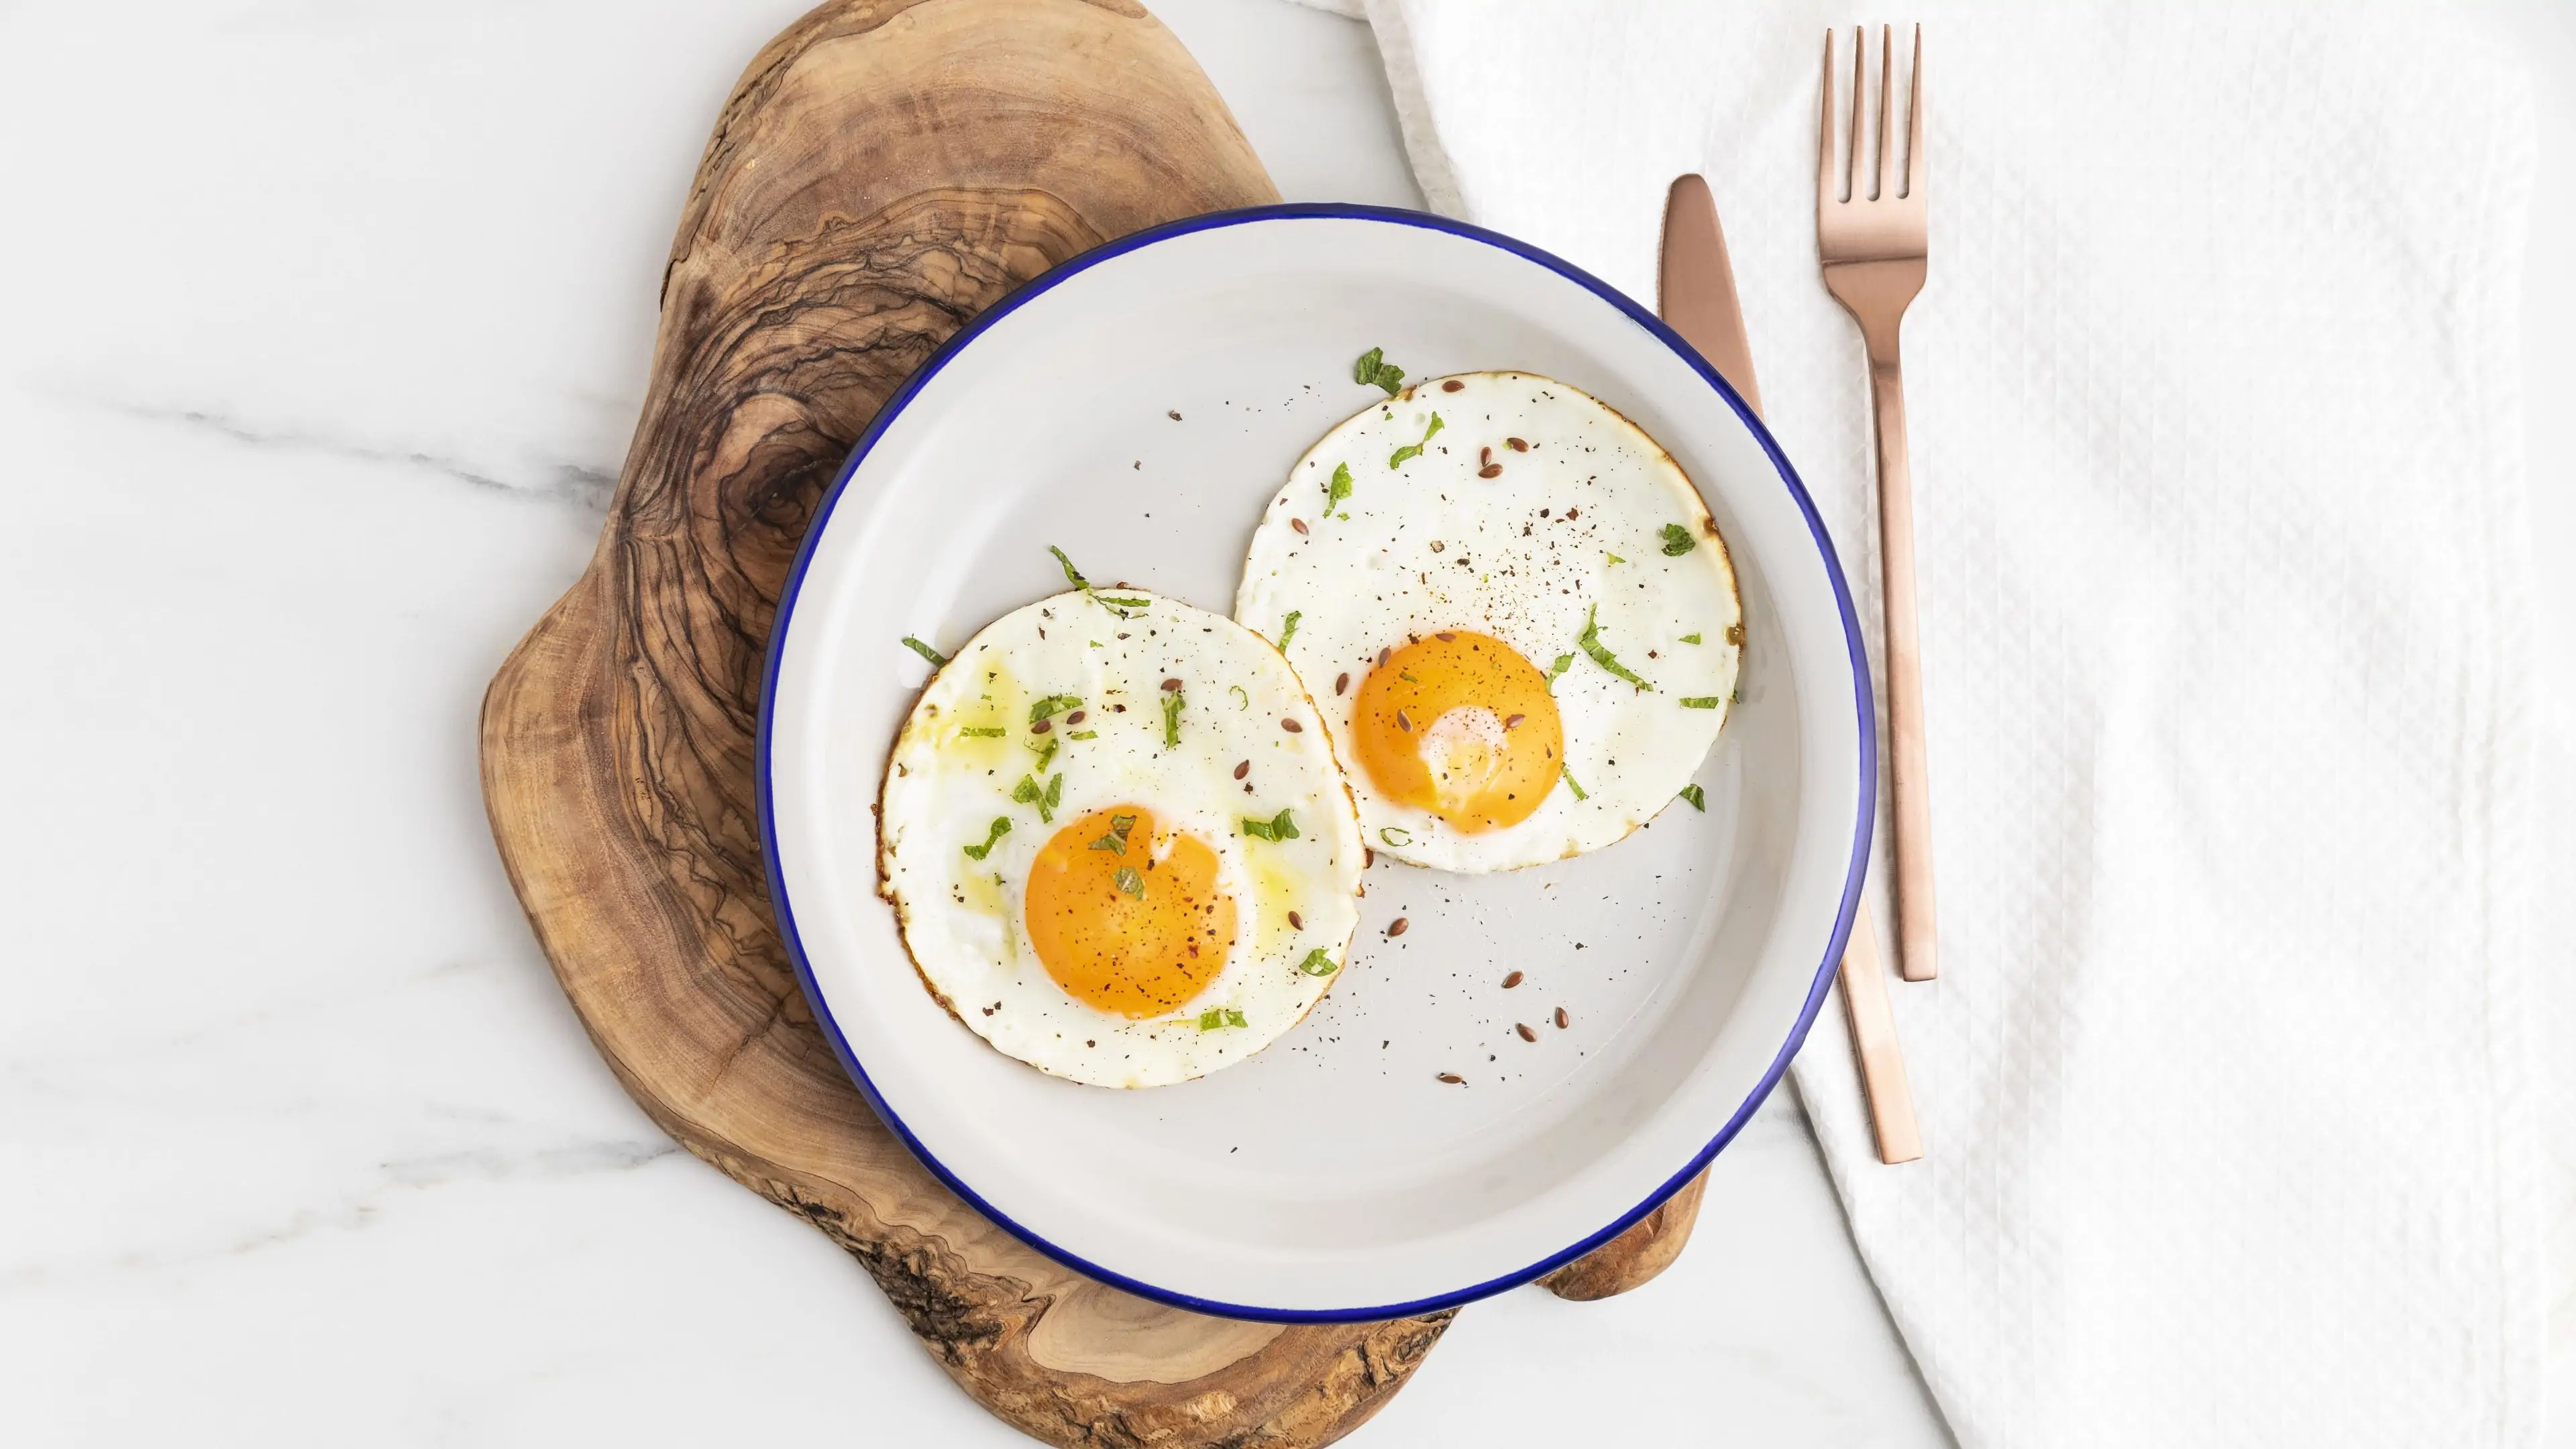 Fried eggs plate with cutlery on wooden board